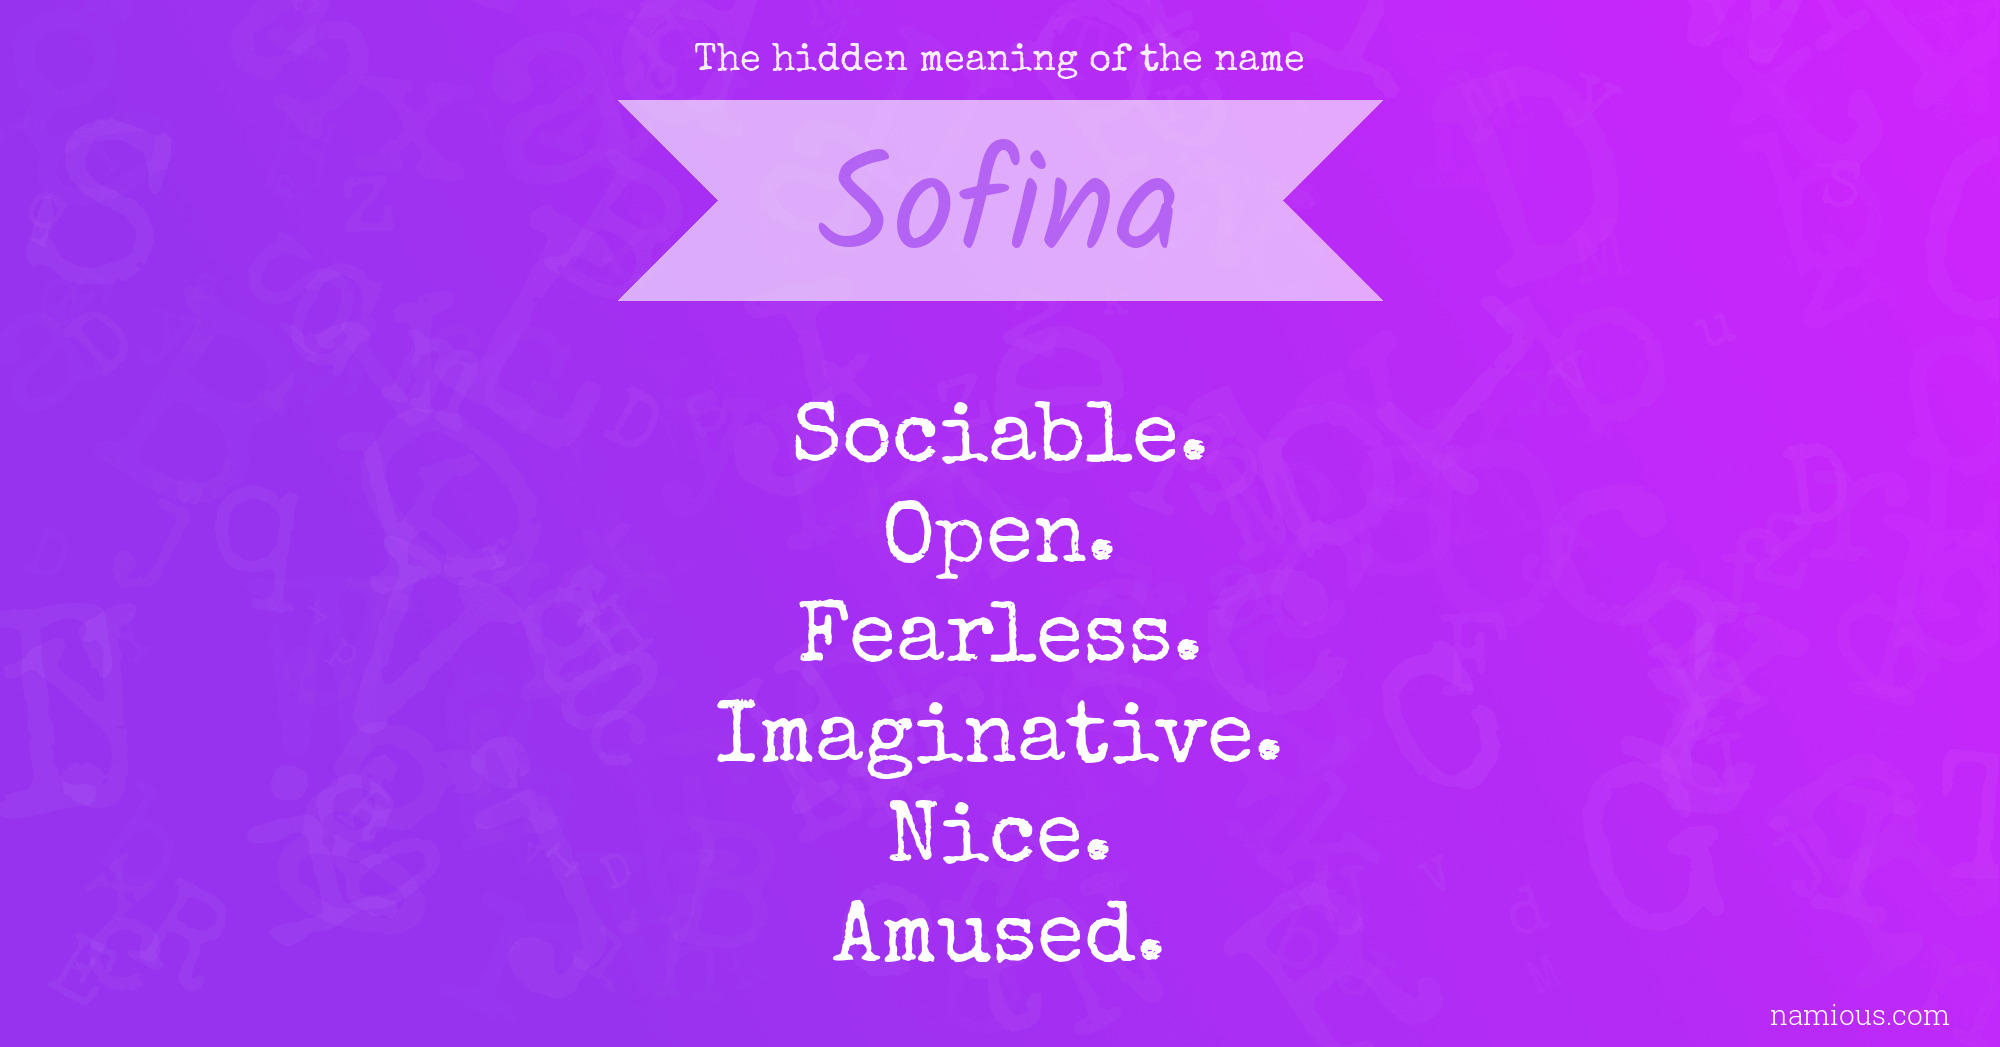 The hidden meaning of the name Sofina